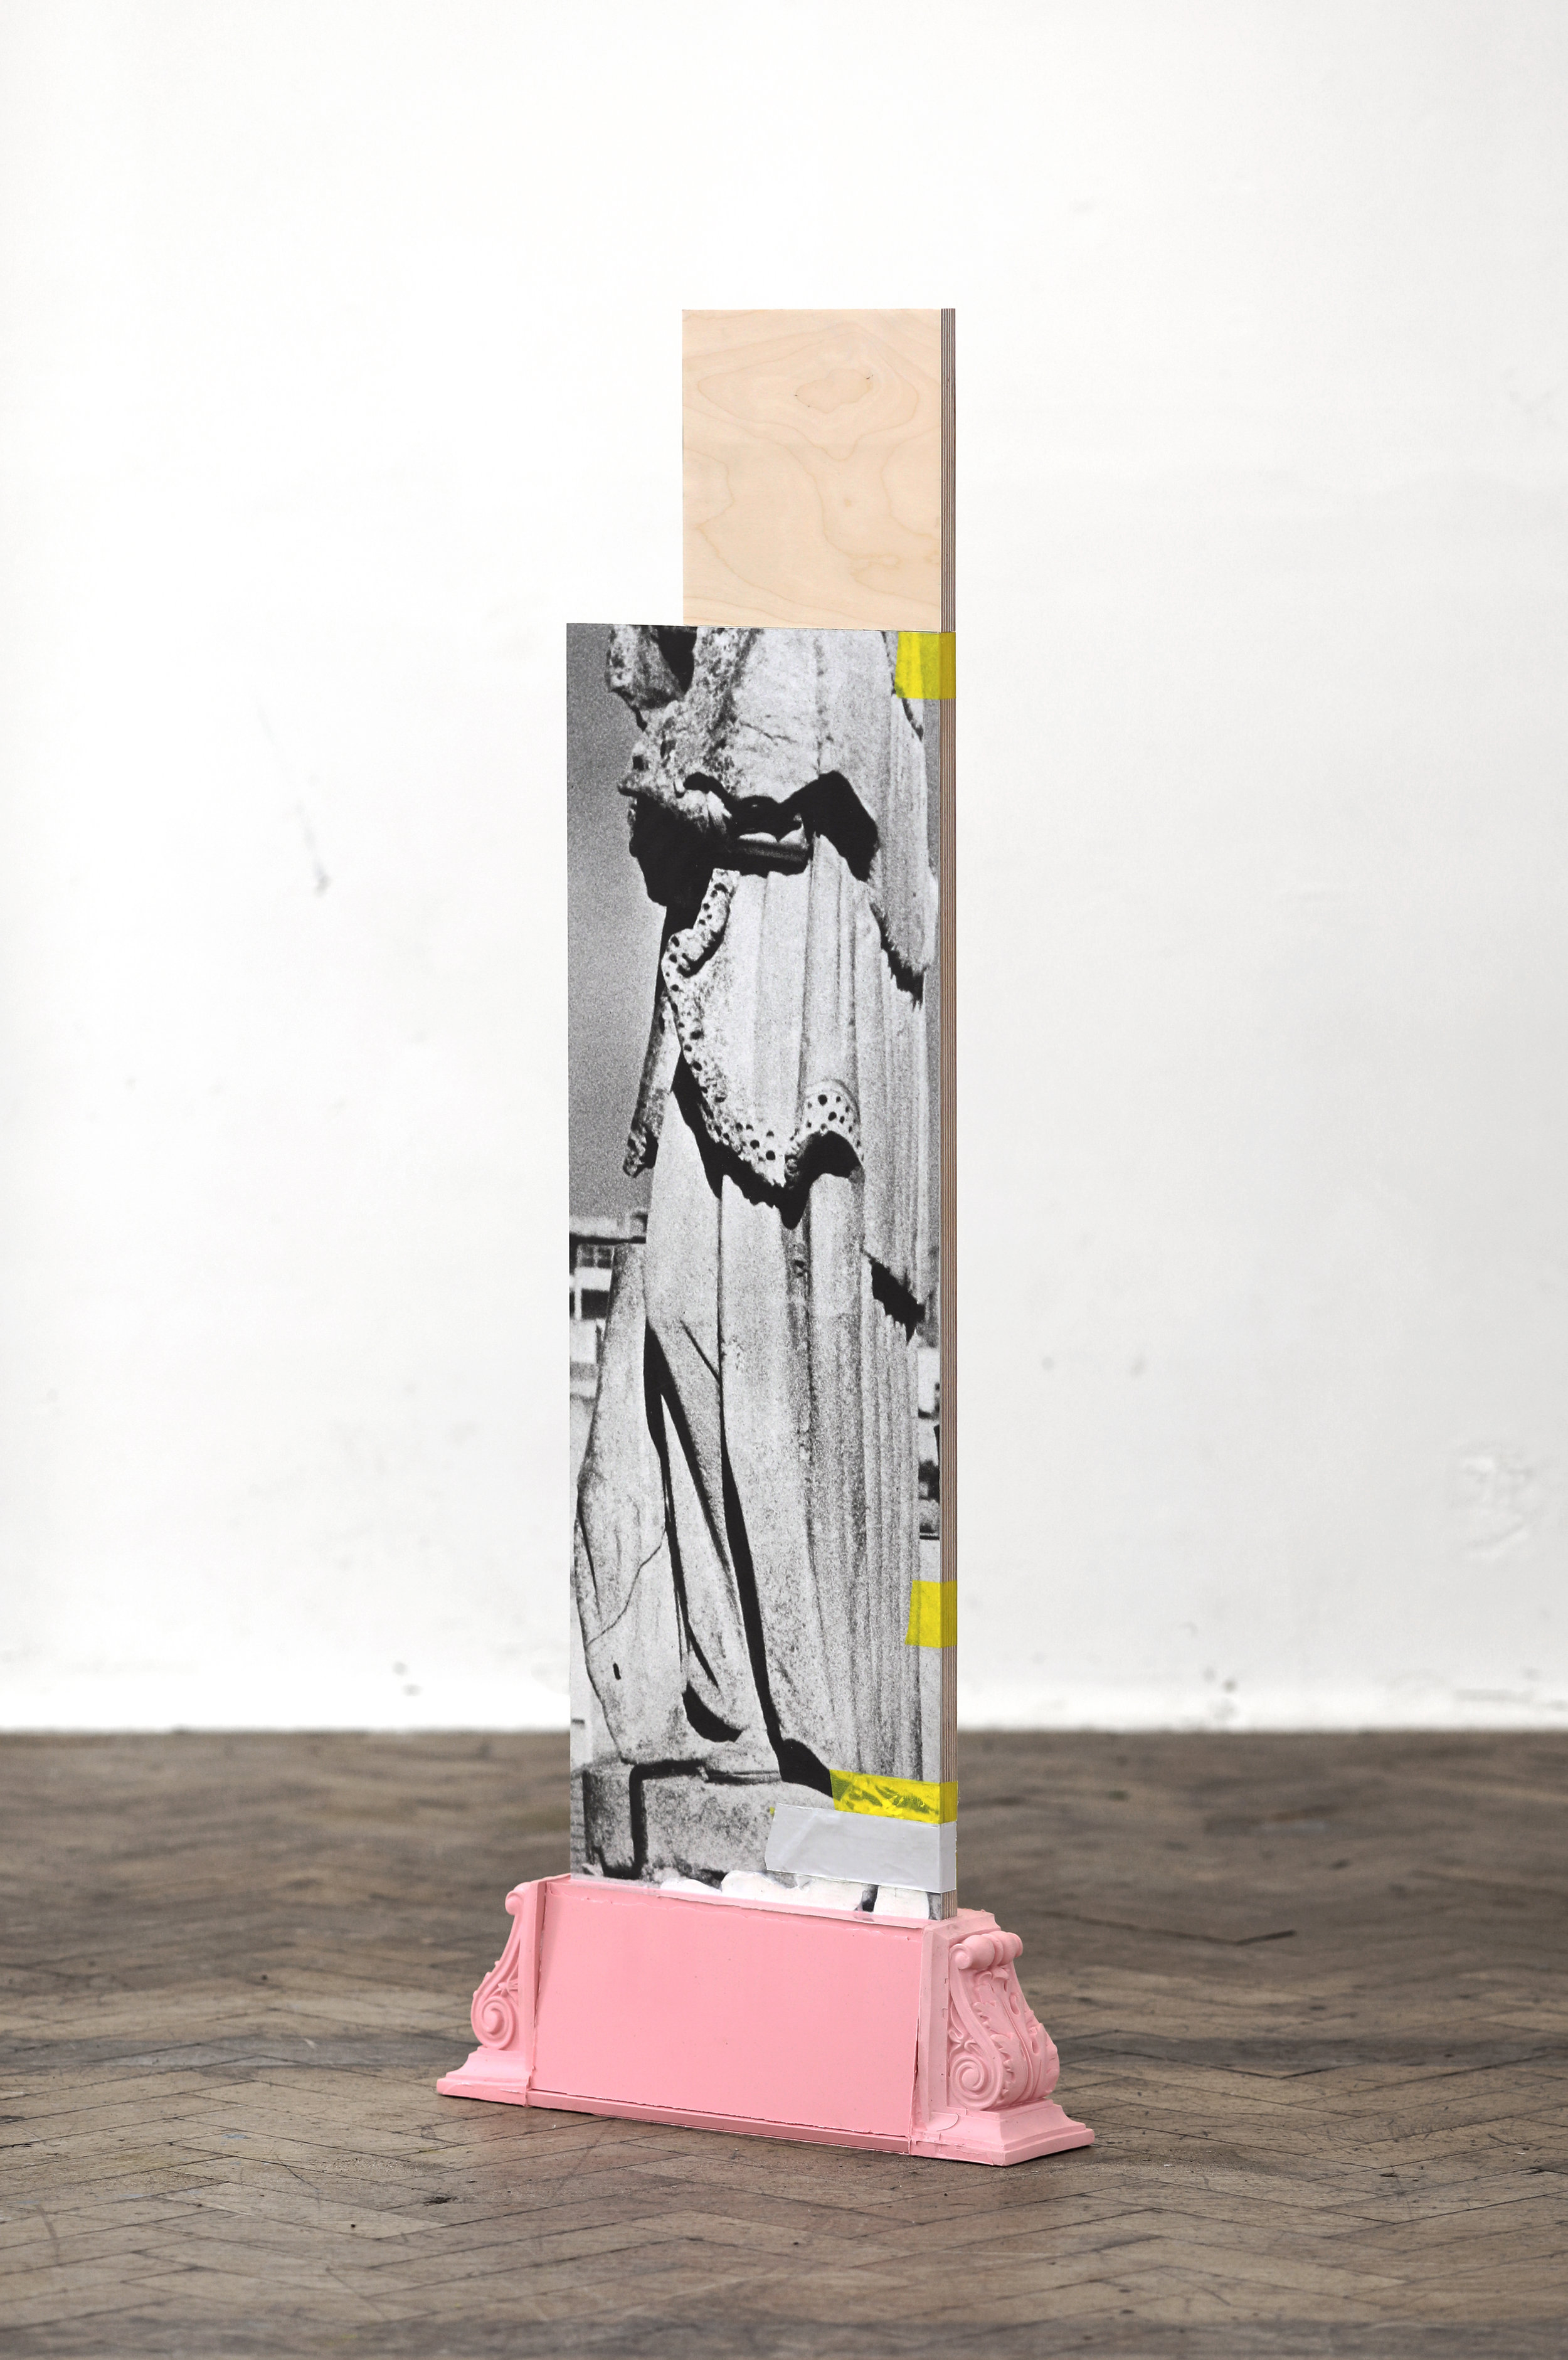    empty in the other    Hahnemüle print, silicon, tape, aluminium and birch plywood  132 x 51.5 x 11 cm  2019 